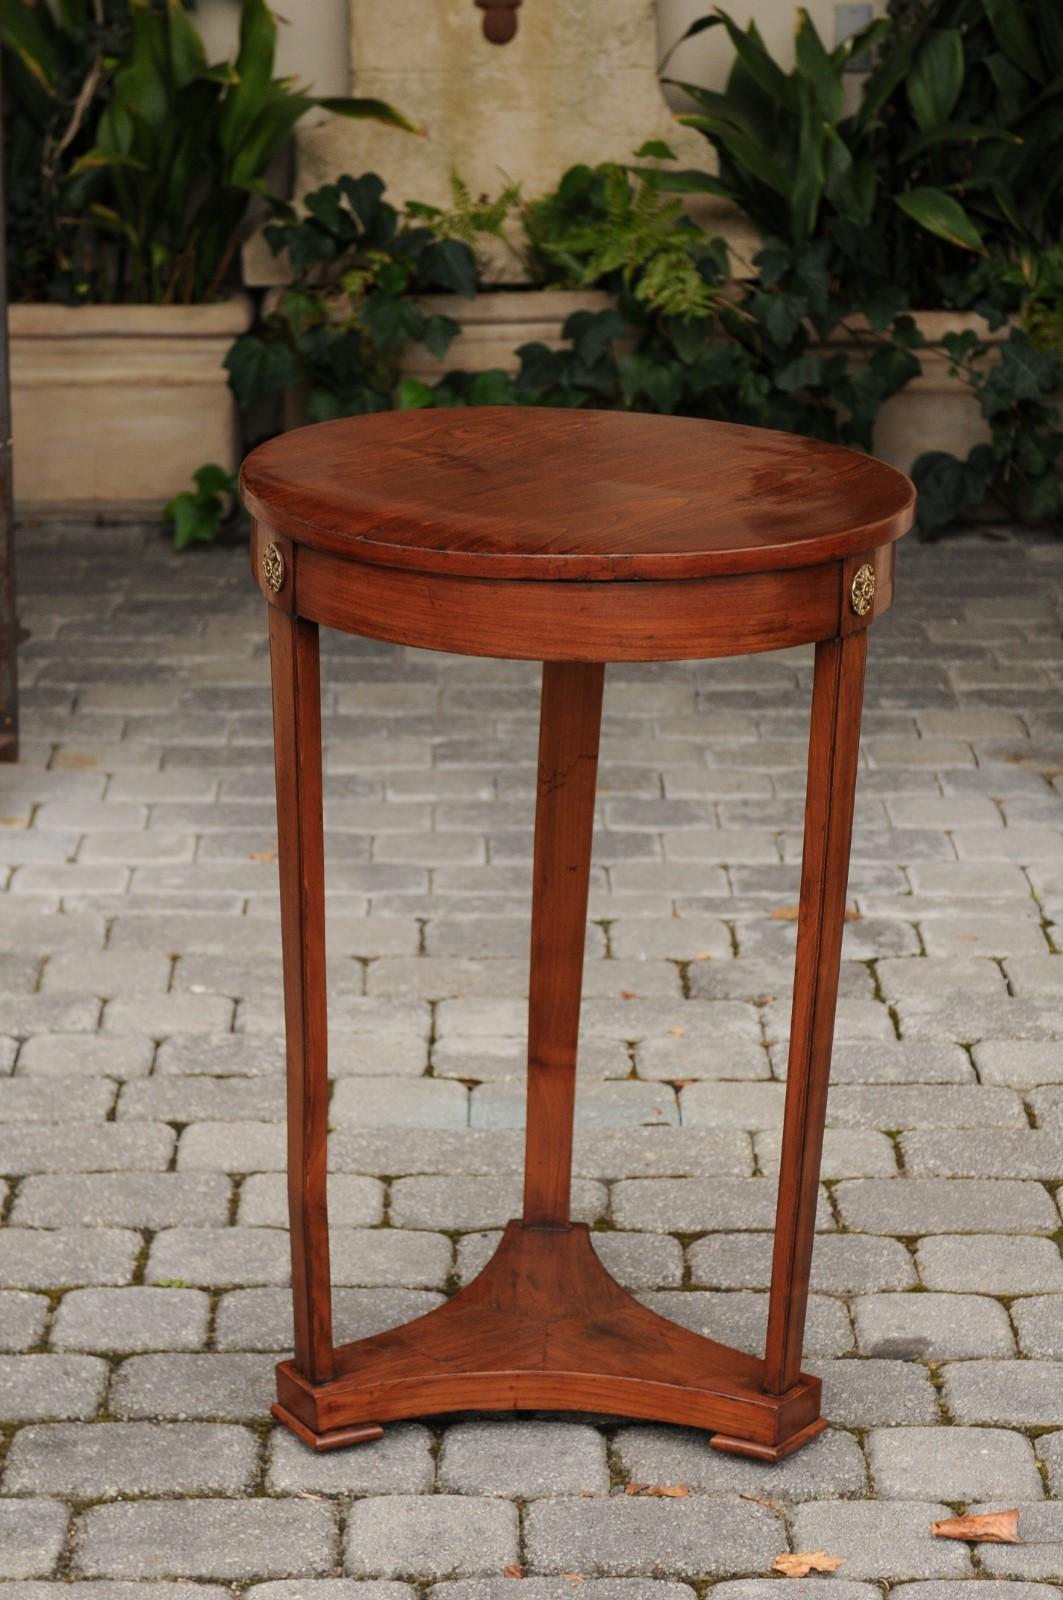 An Austrian Biedermeier period round walnut side table from the first half of the 19th century, with bronze rosettes. This Biedermeier table features a circular top, sitting above an elegant apron, delicately adorned with bronze rosettes